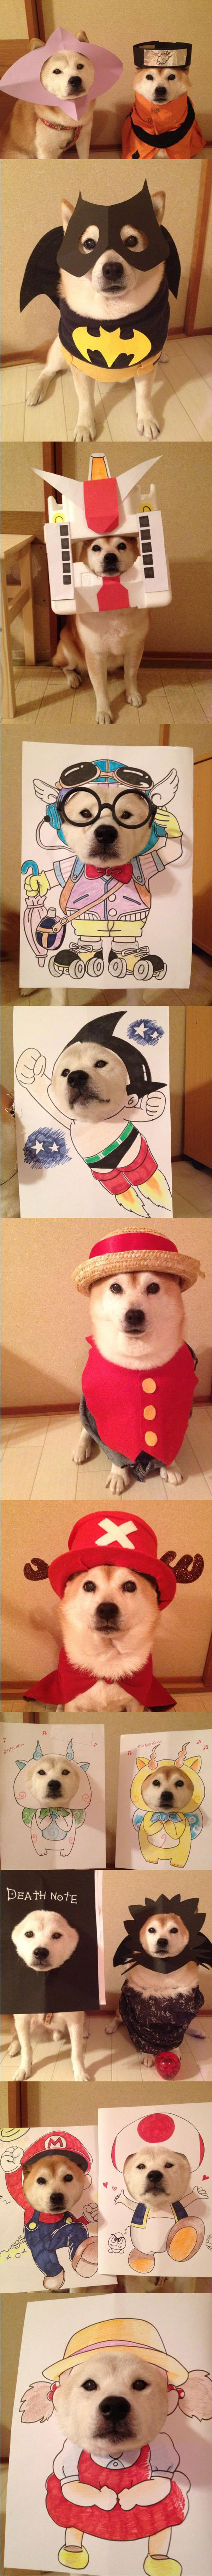 wow such costumes